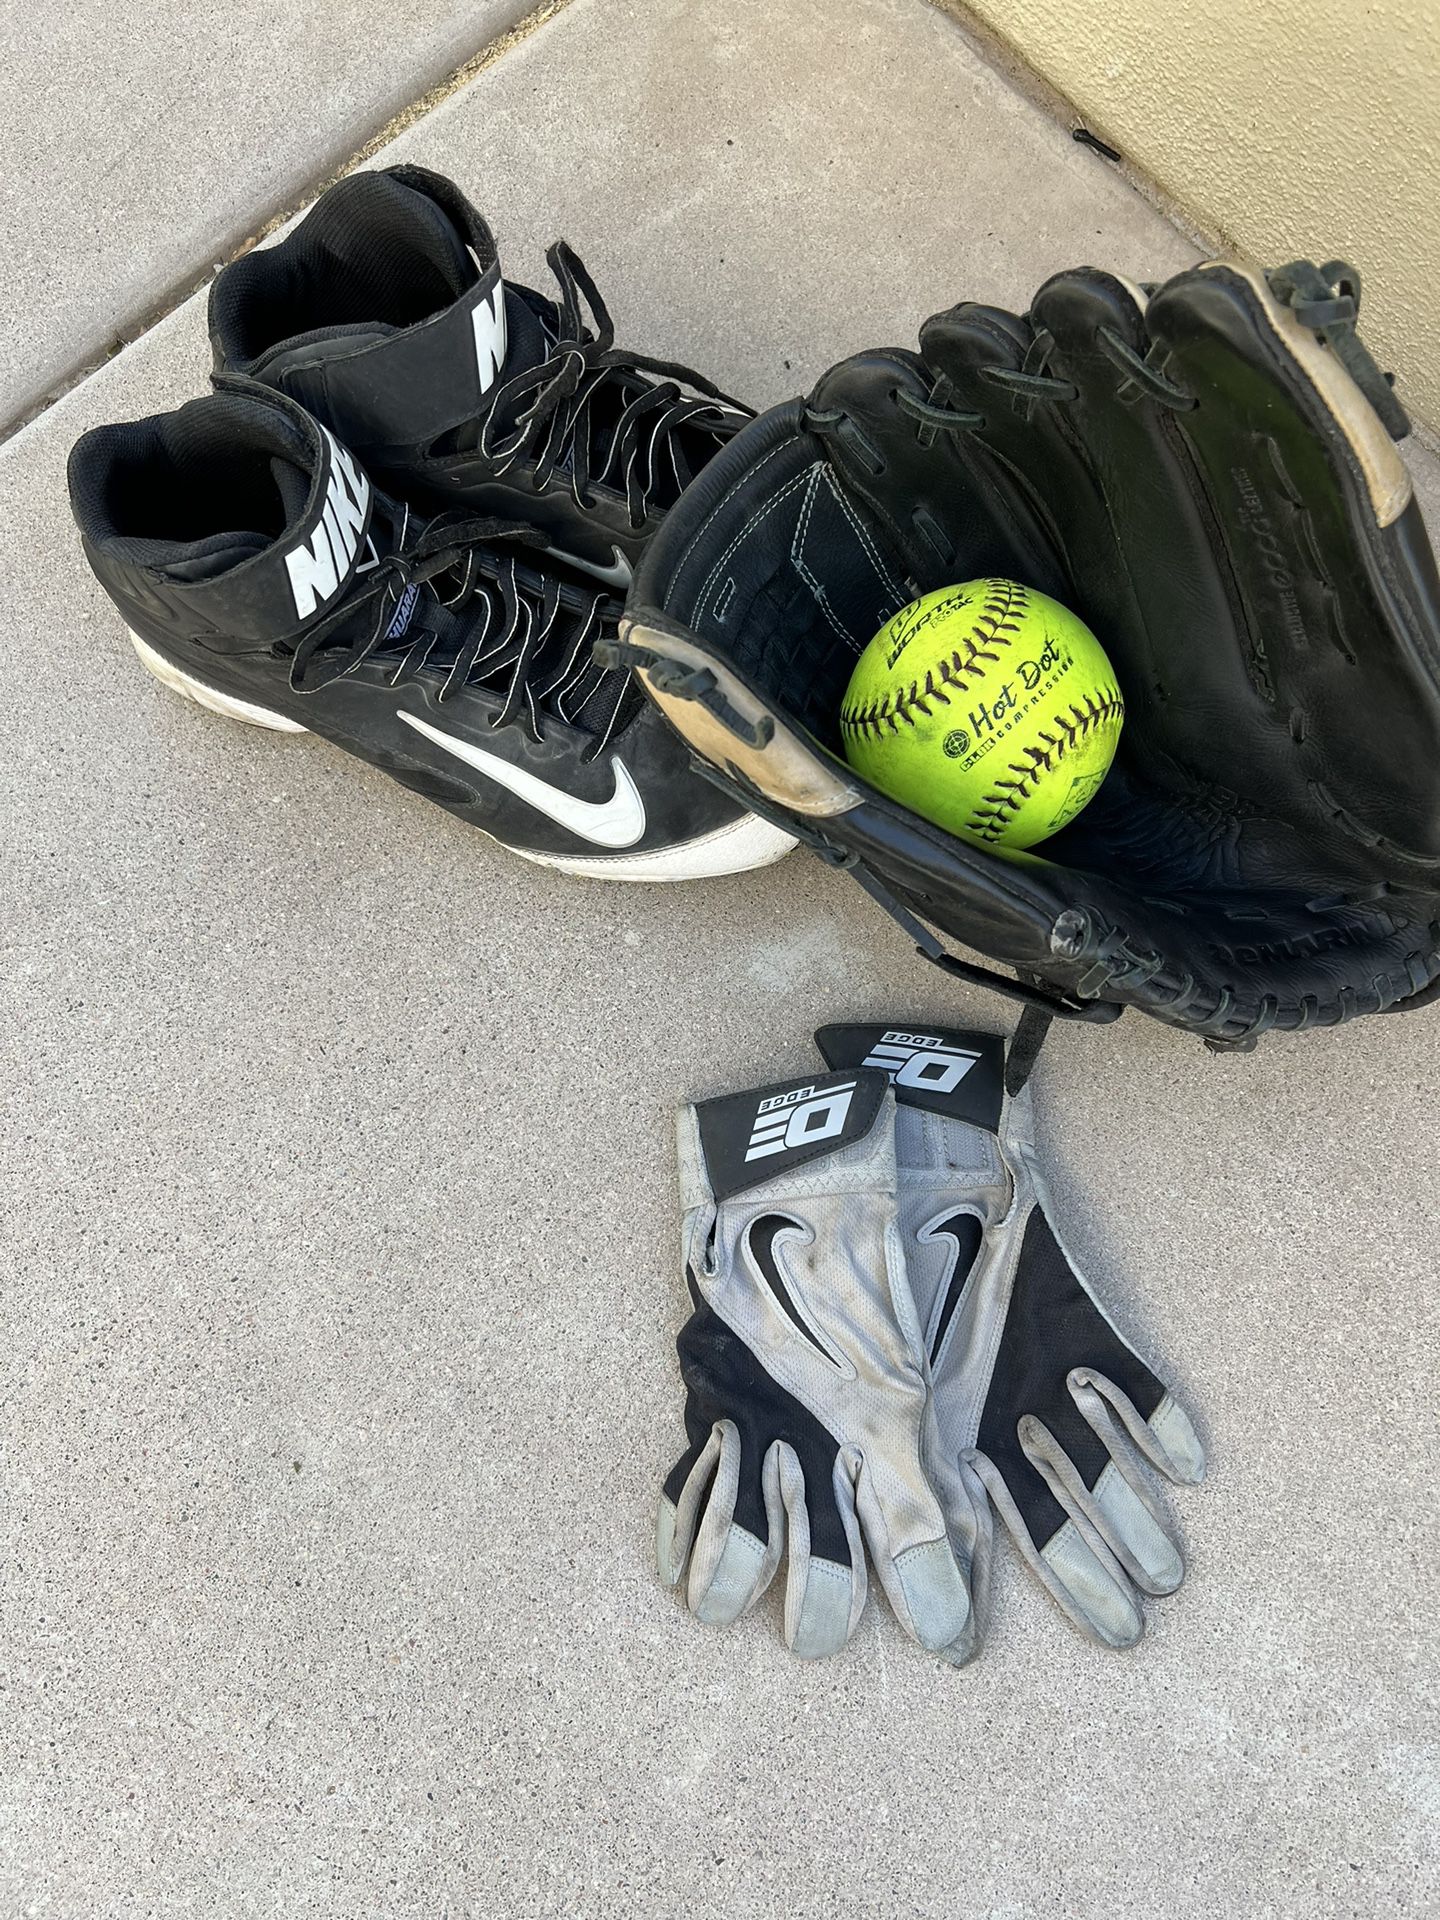 Baseball Glove And Accessories 